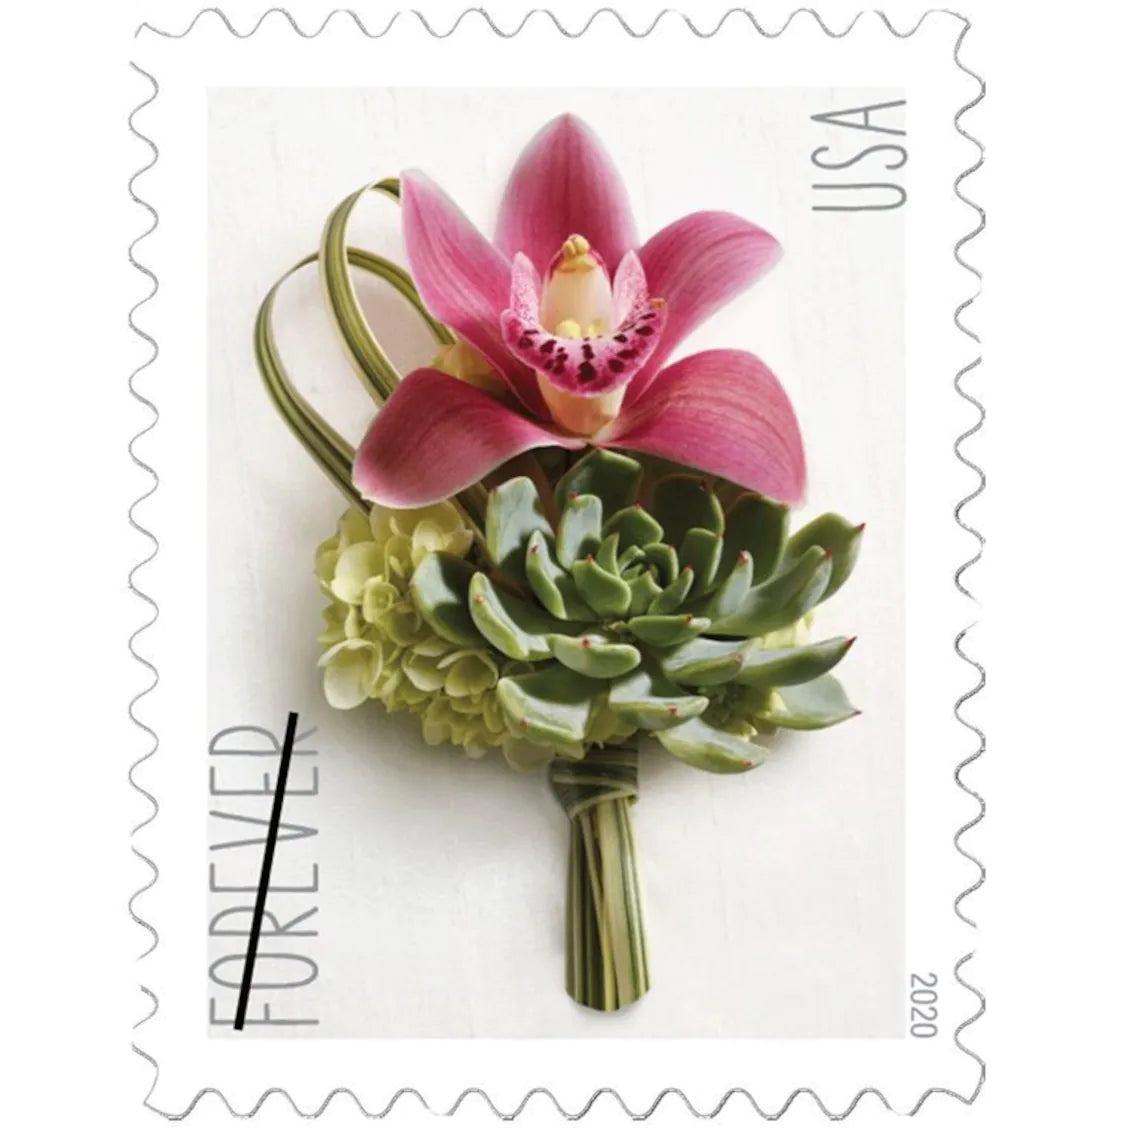 USPS Contemporary Boutonniere  Forever Stamps - Sheet of 20 Postage Stamps